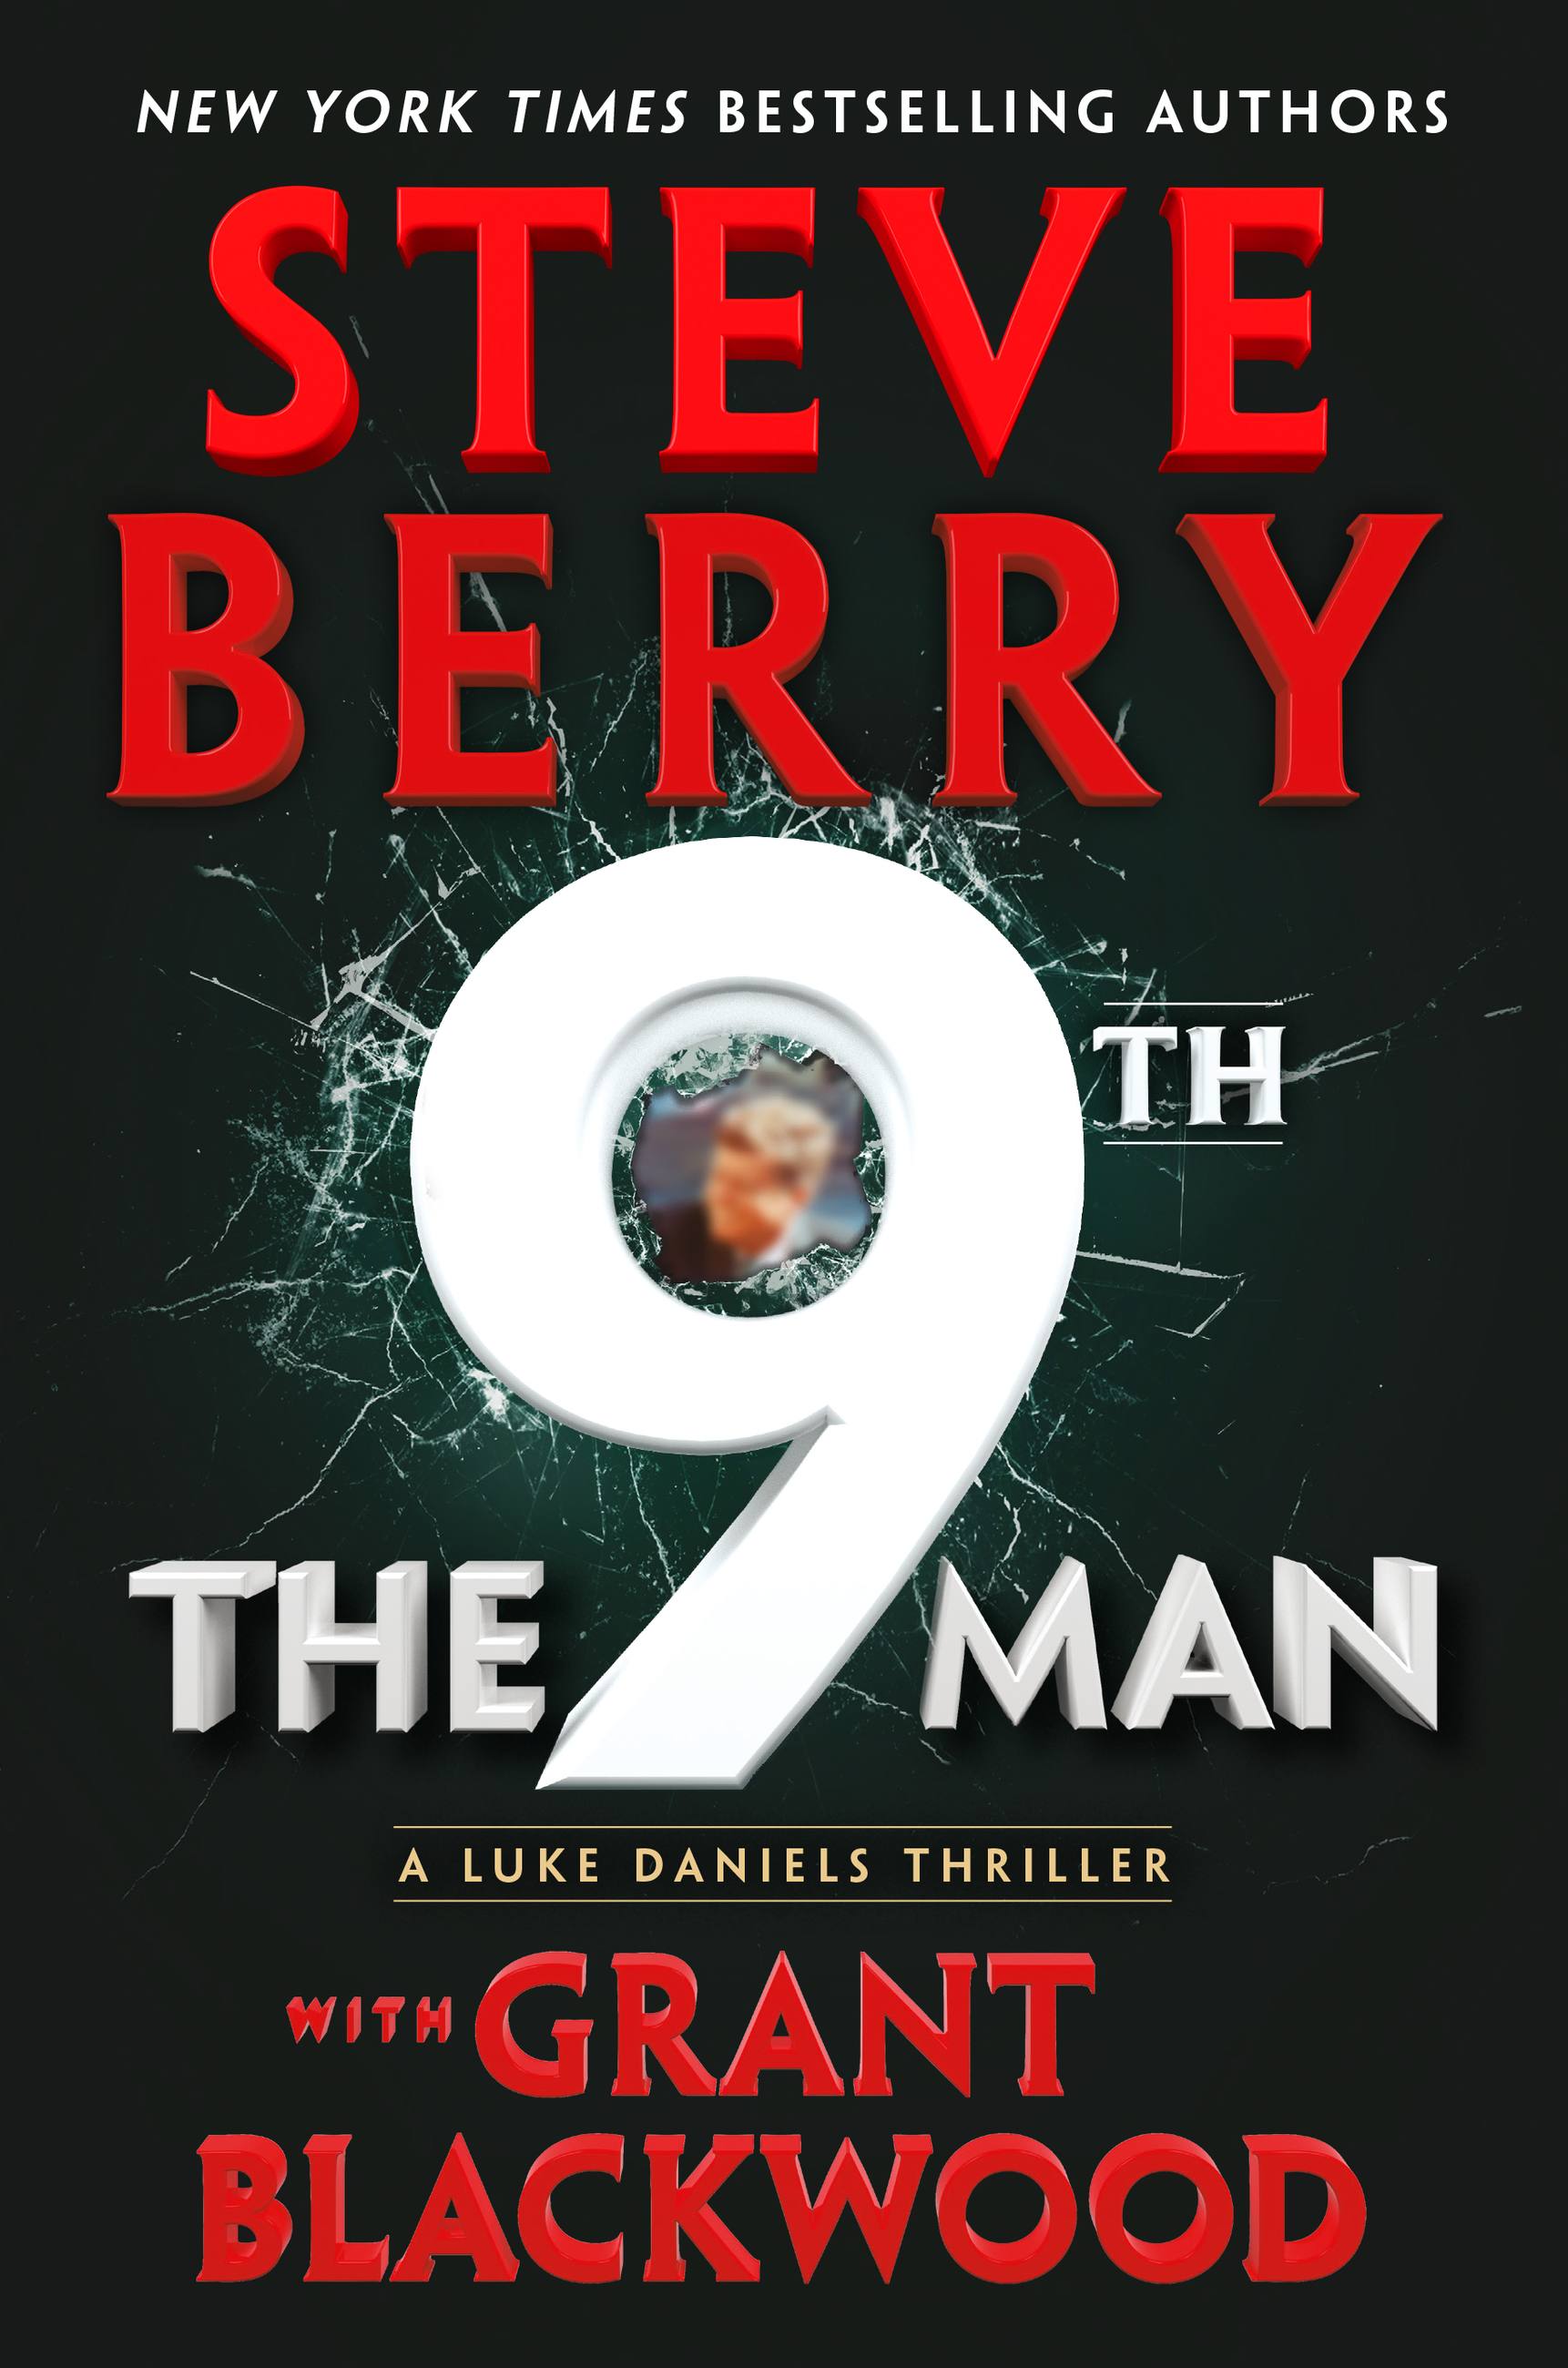 Steve　Berry　by　Book　Group　The　Man　9th　Hachette